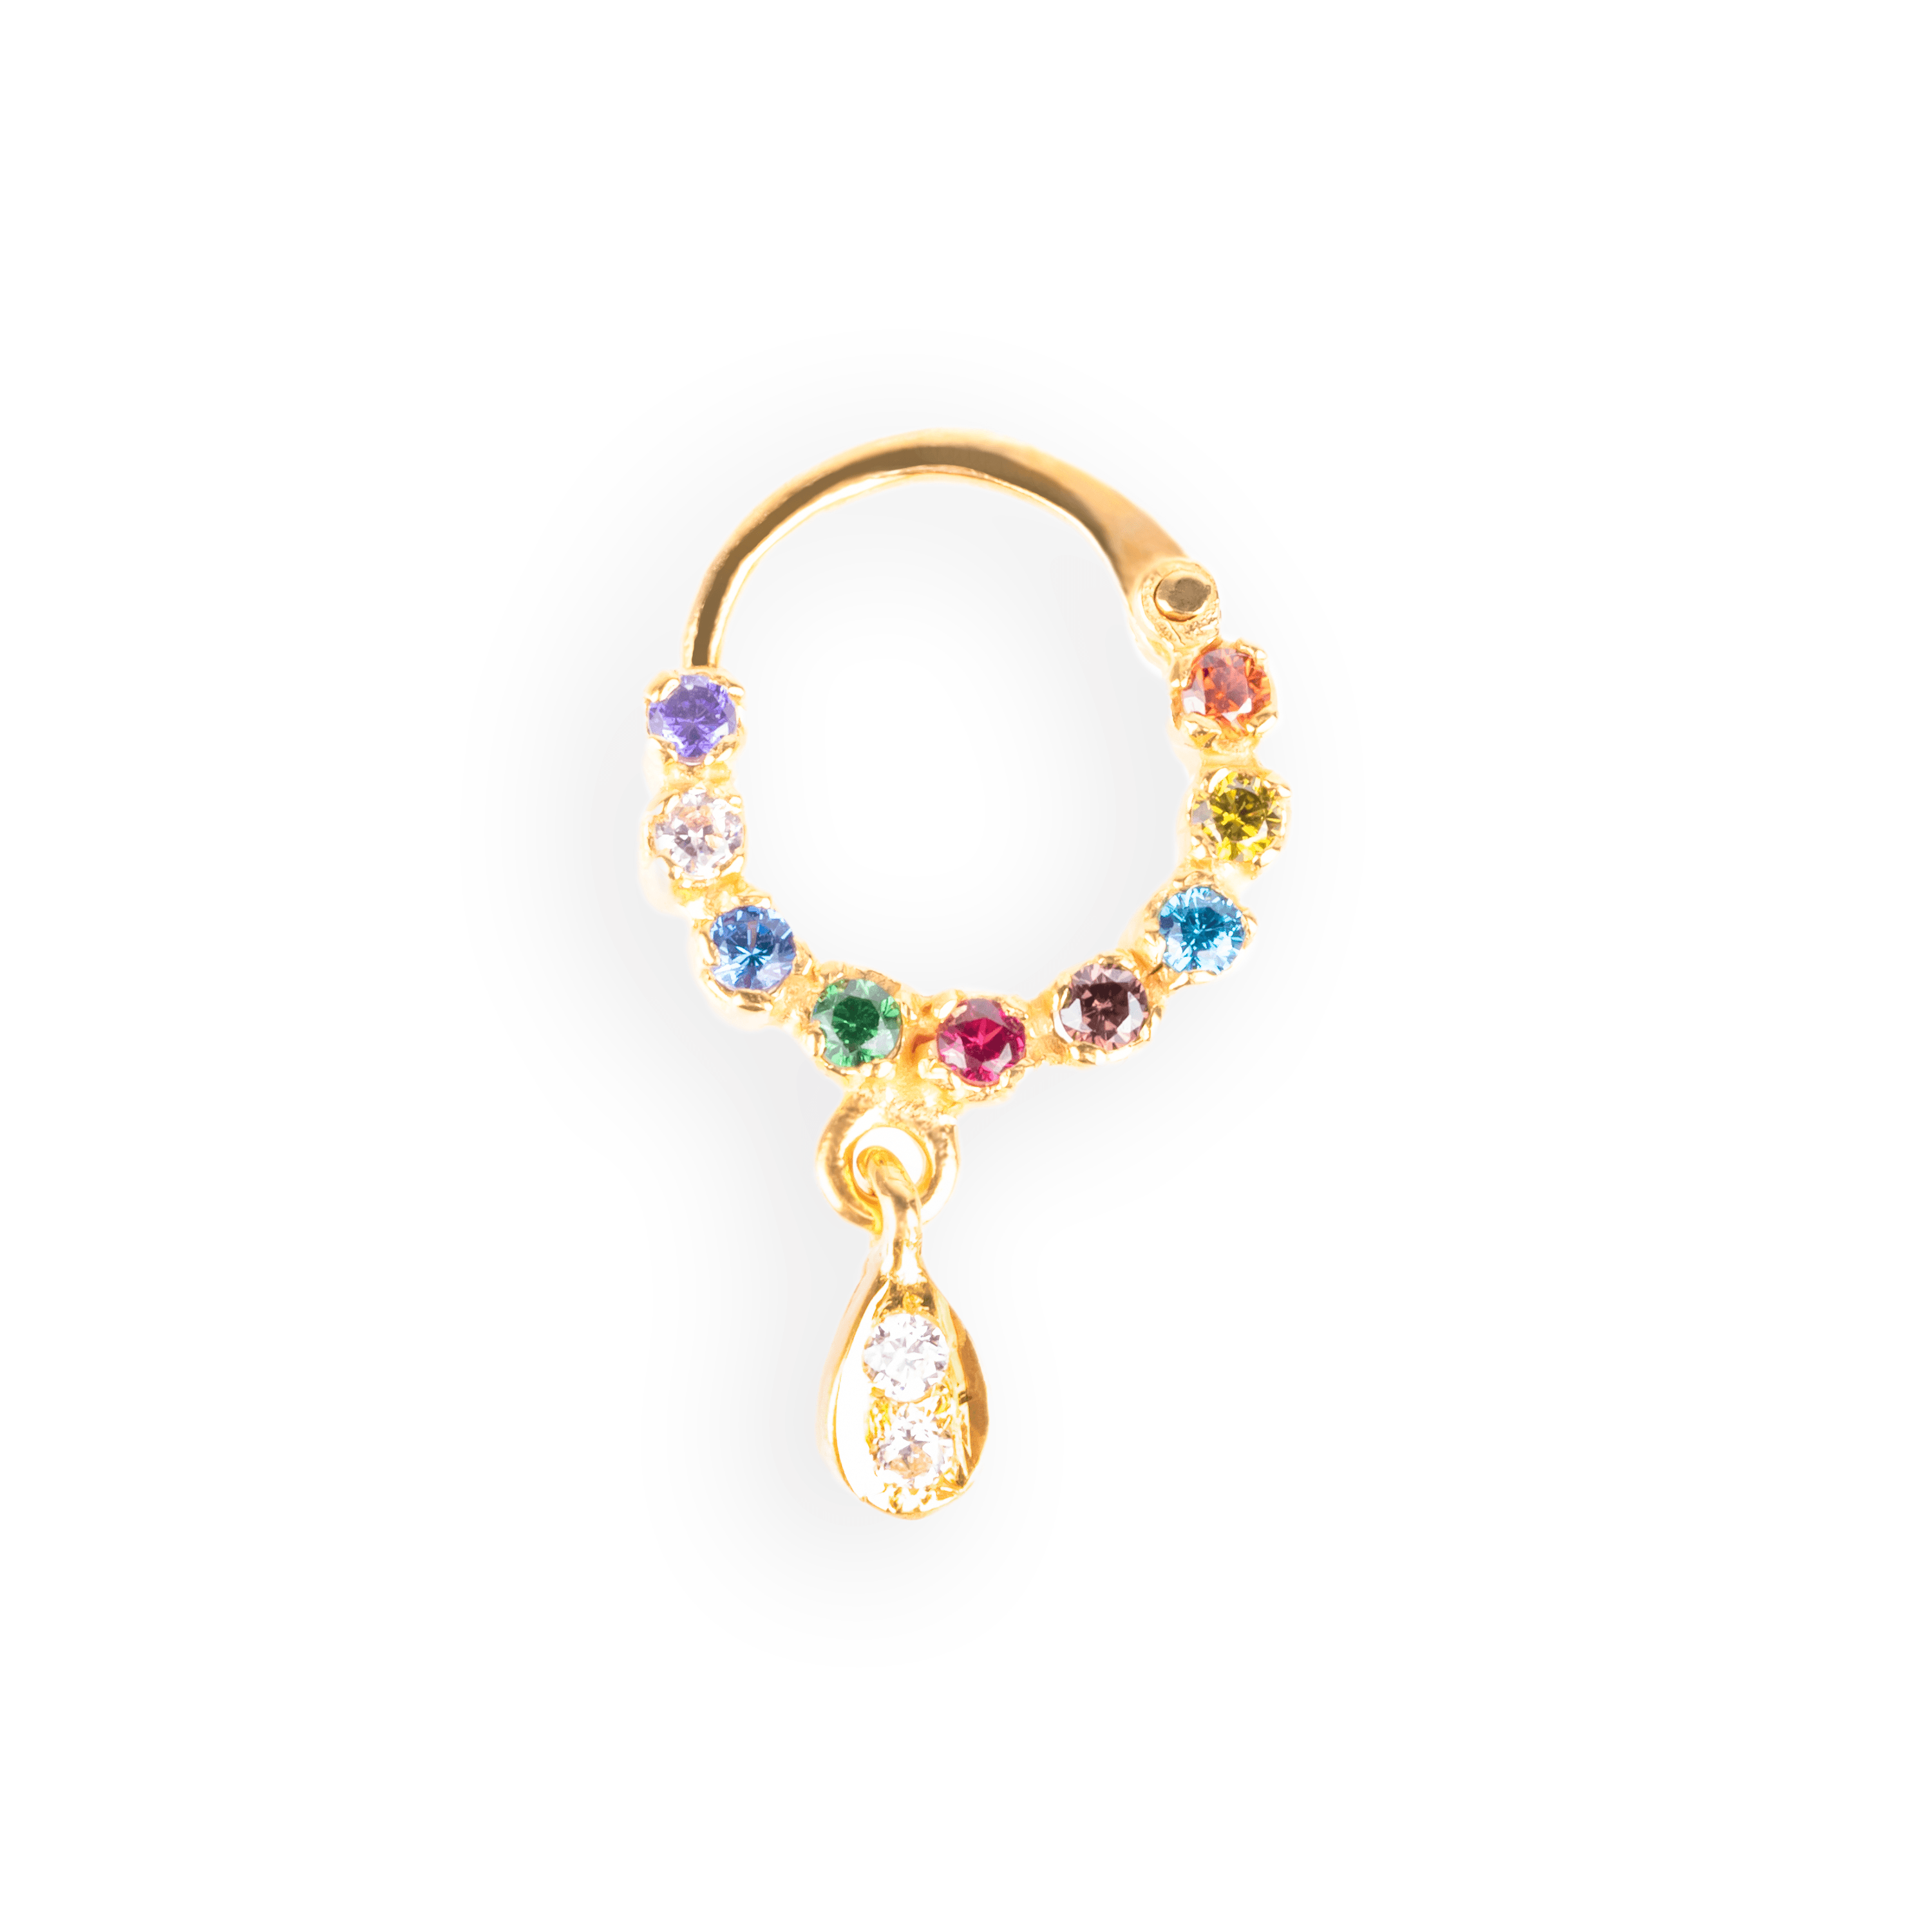 18ct Yellow Gold Nose Ring with Multi-Coloured Cubic Zirconias and a Drop NR-7586 - Minar Jewellers